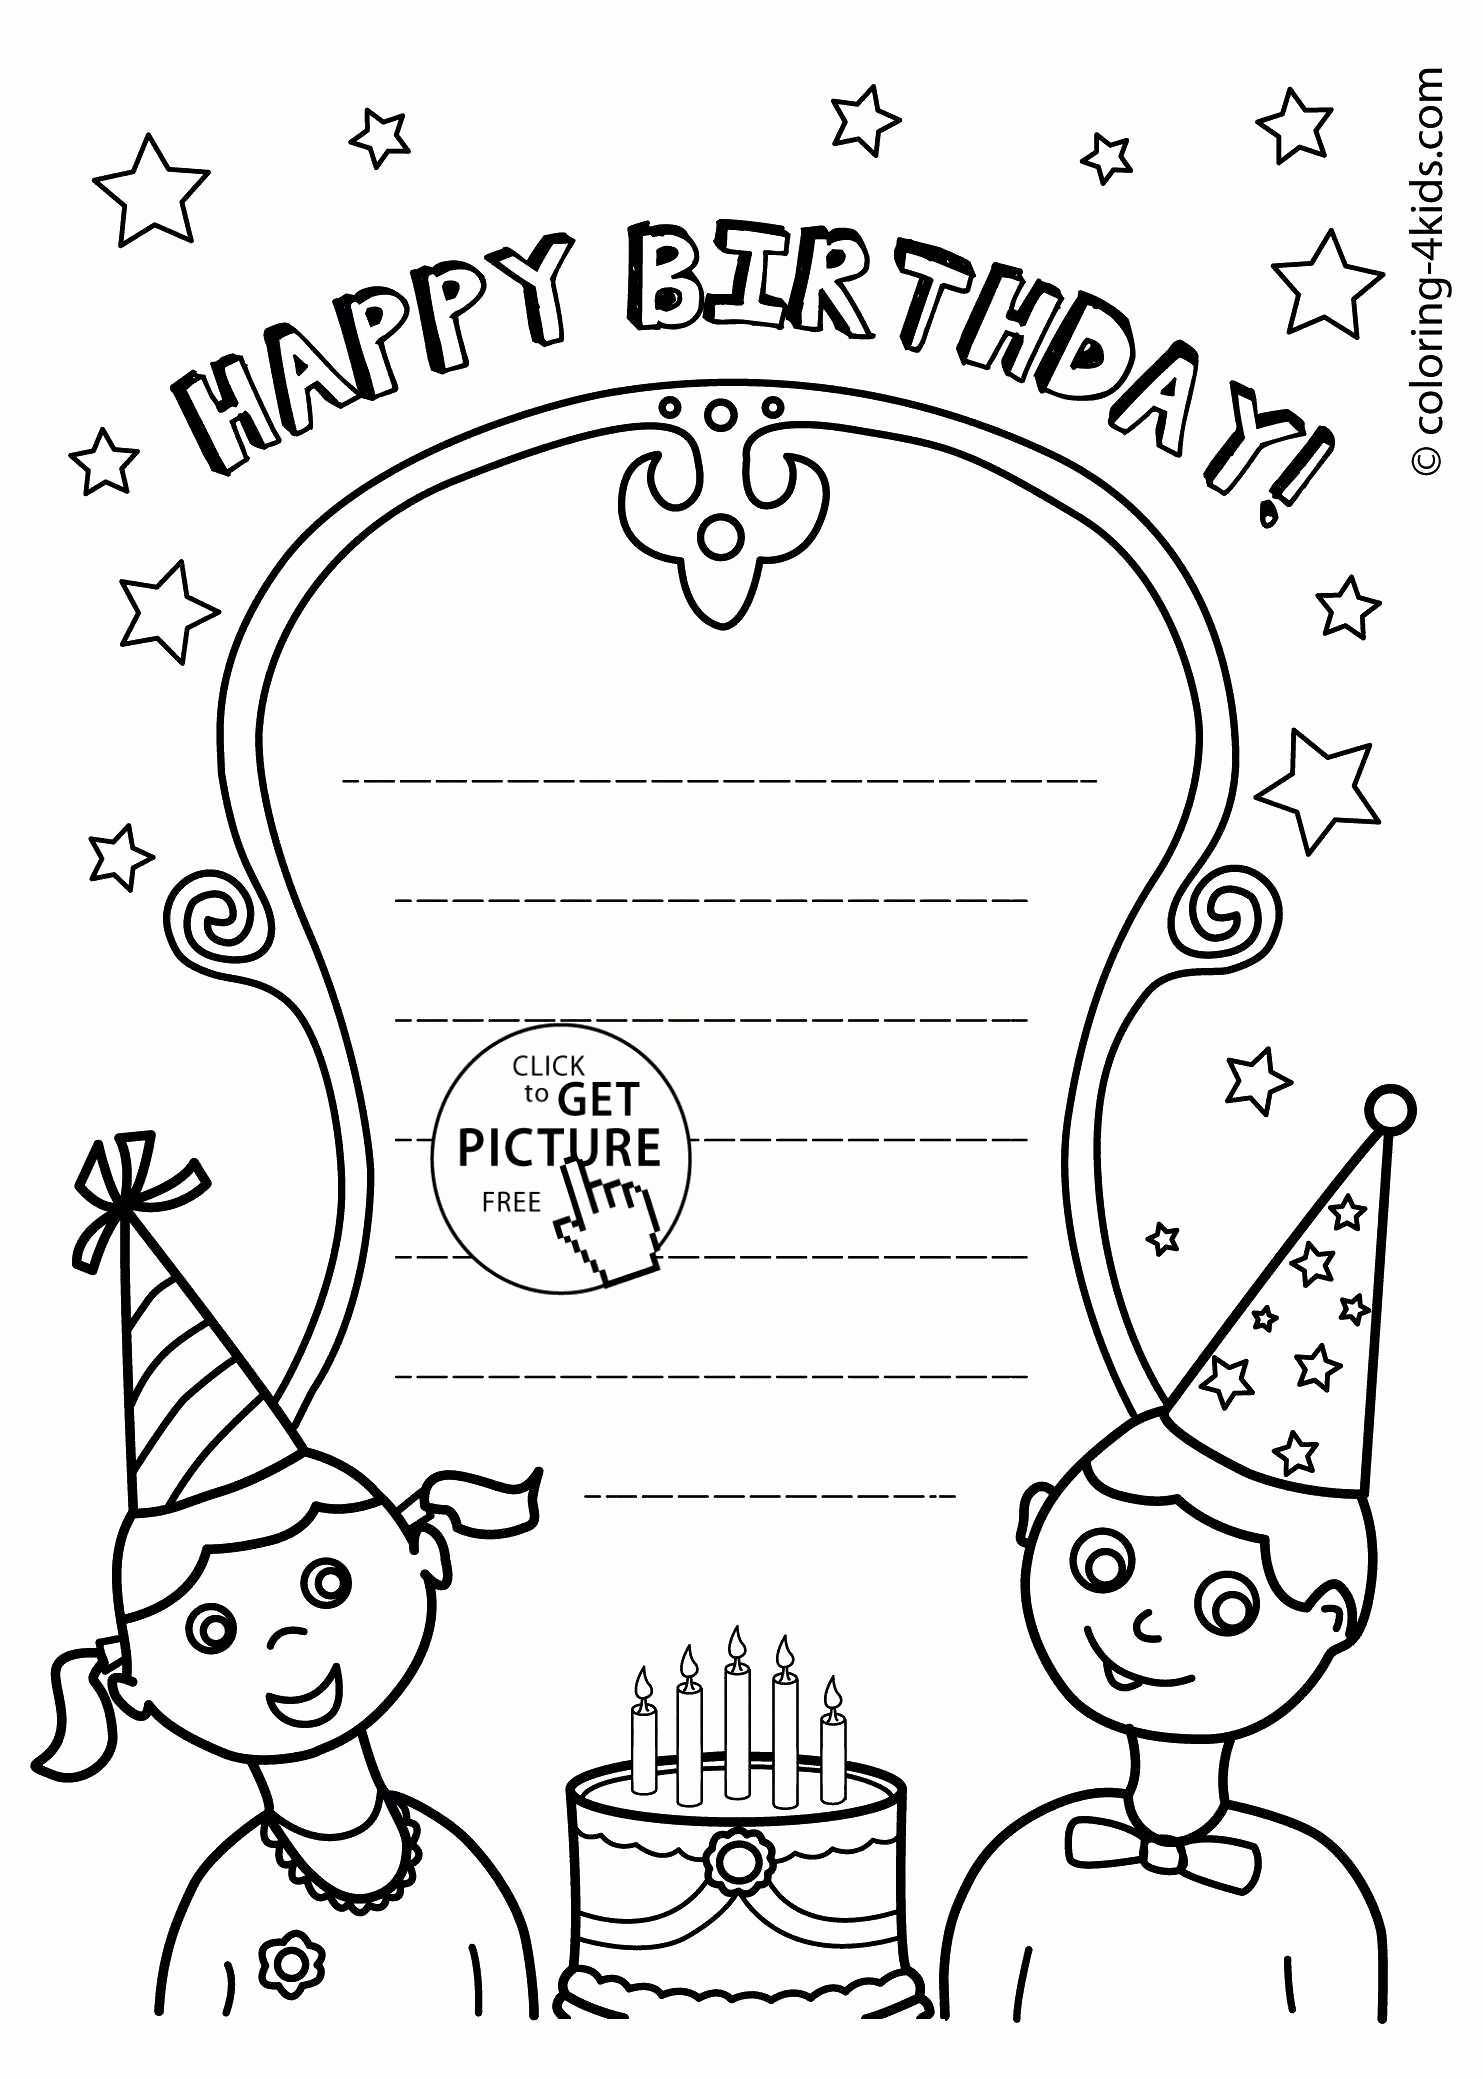 Happy Birthday Coloring Pages For Friends Free Printable Happy Birthday Cards For Friends Luxury Birthday Card